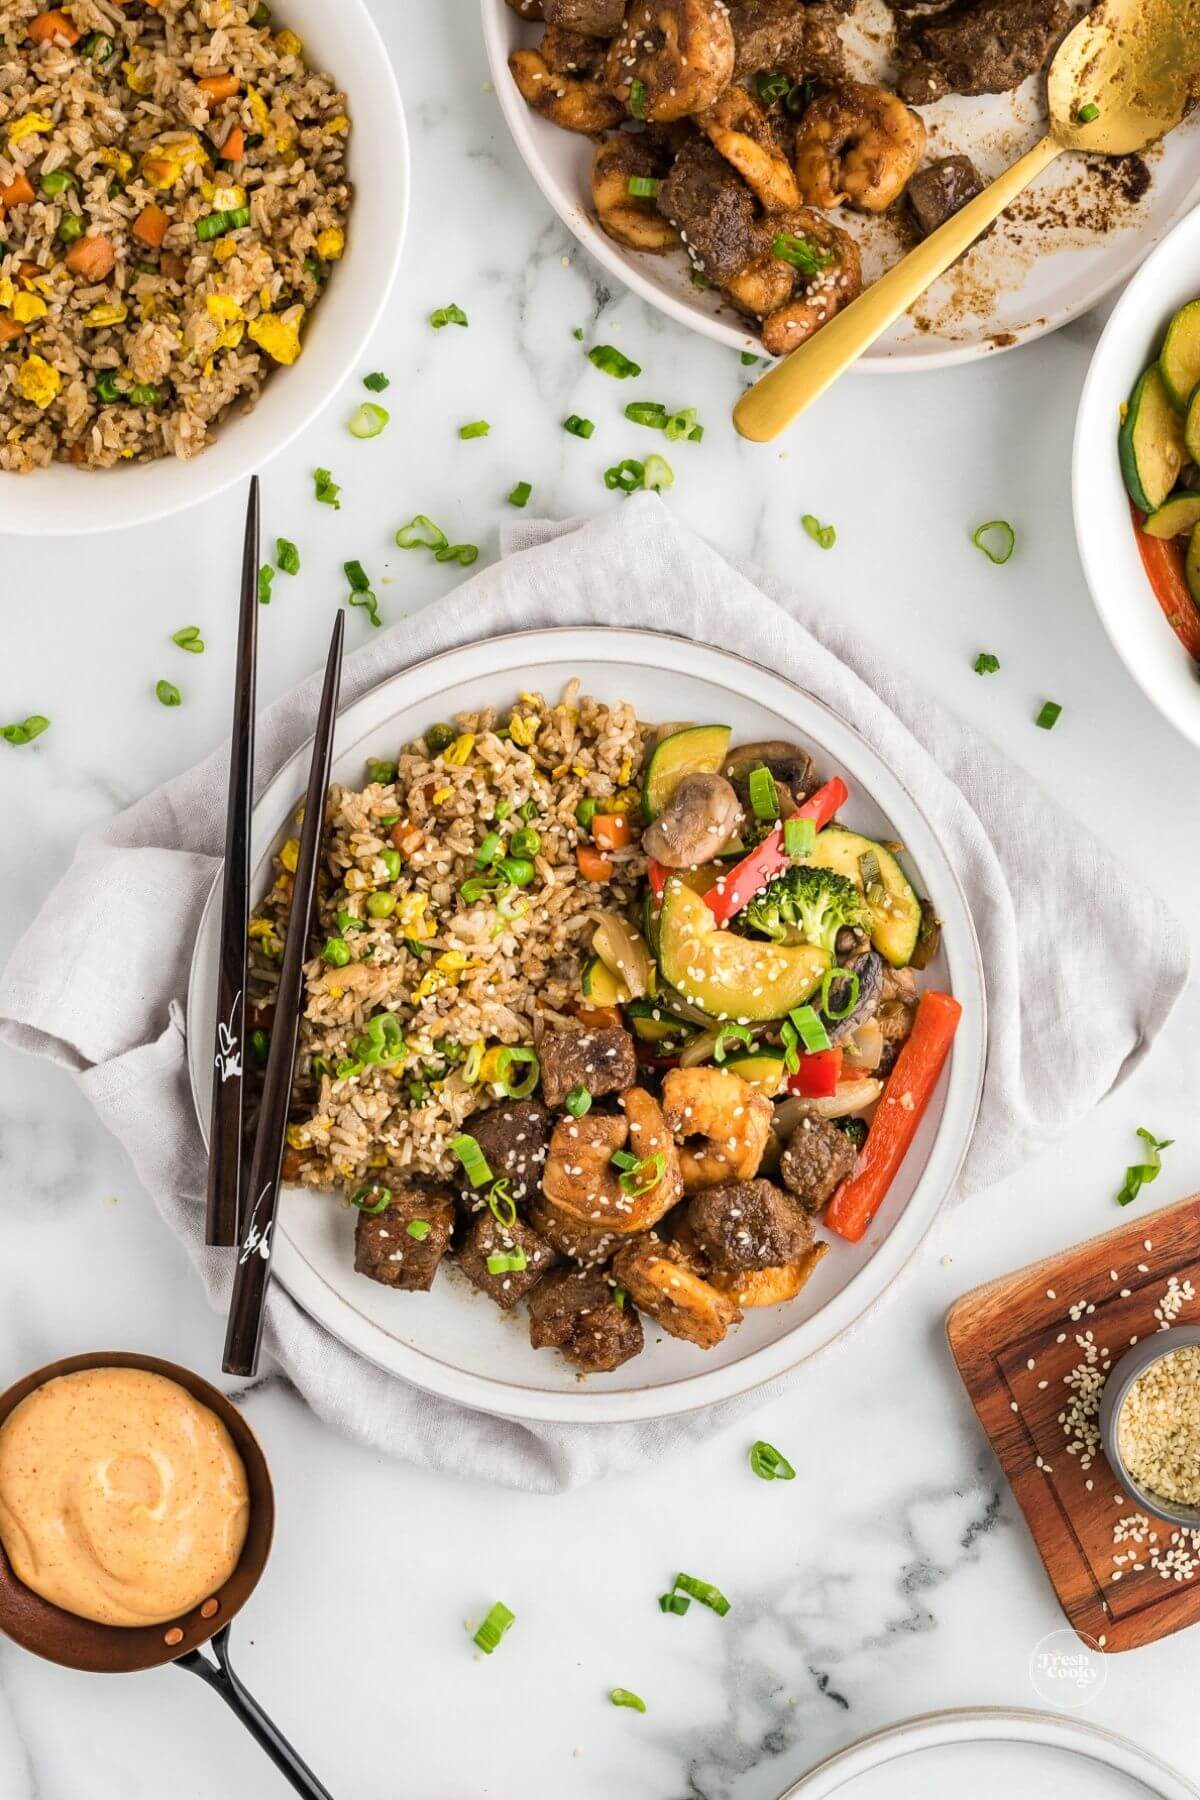 HIbachi steak and shrimp recipe plated with yum yum sauce and bowls of fried rice, hibachi veggies nearby.